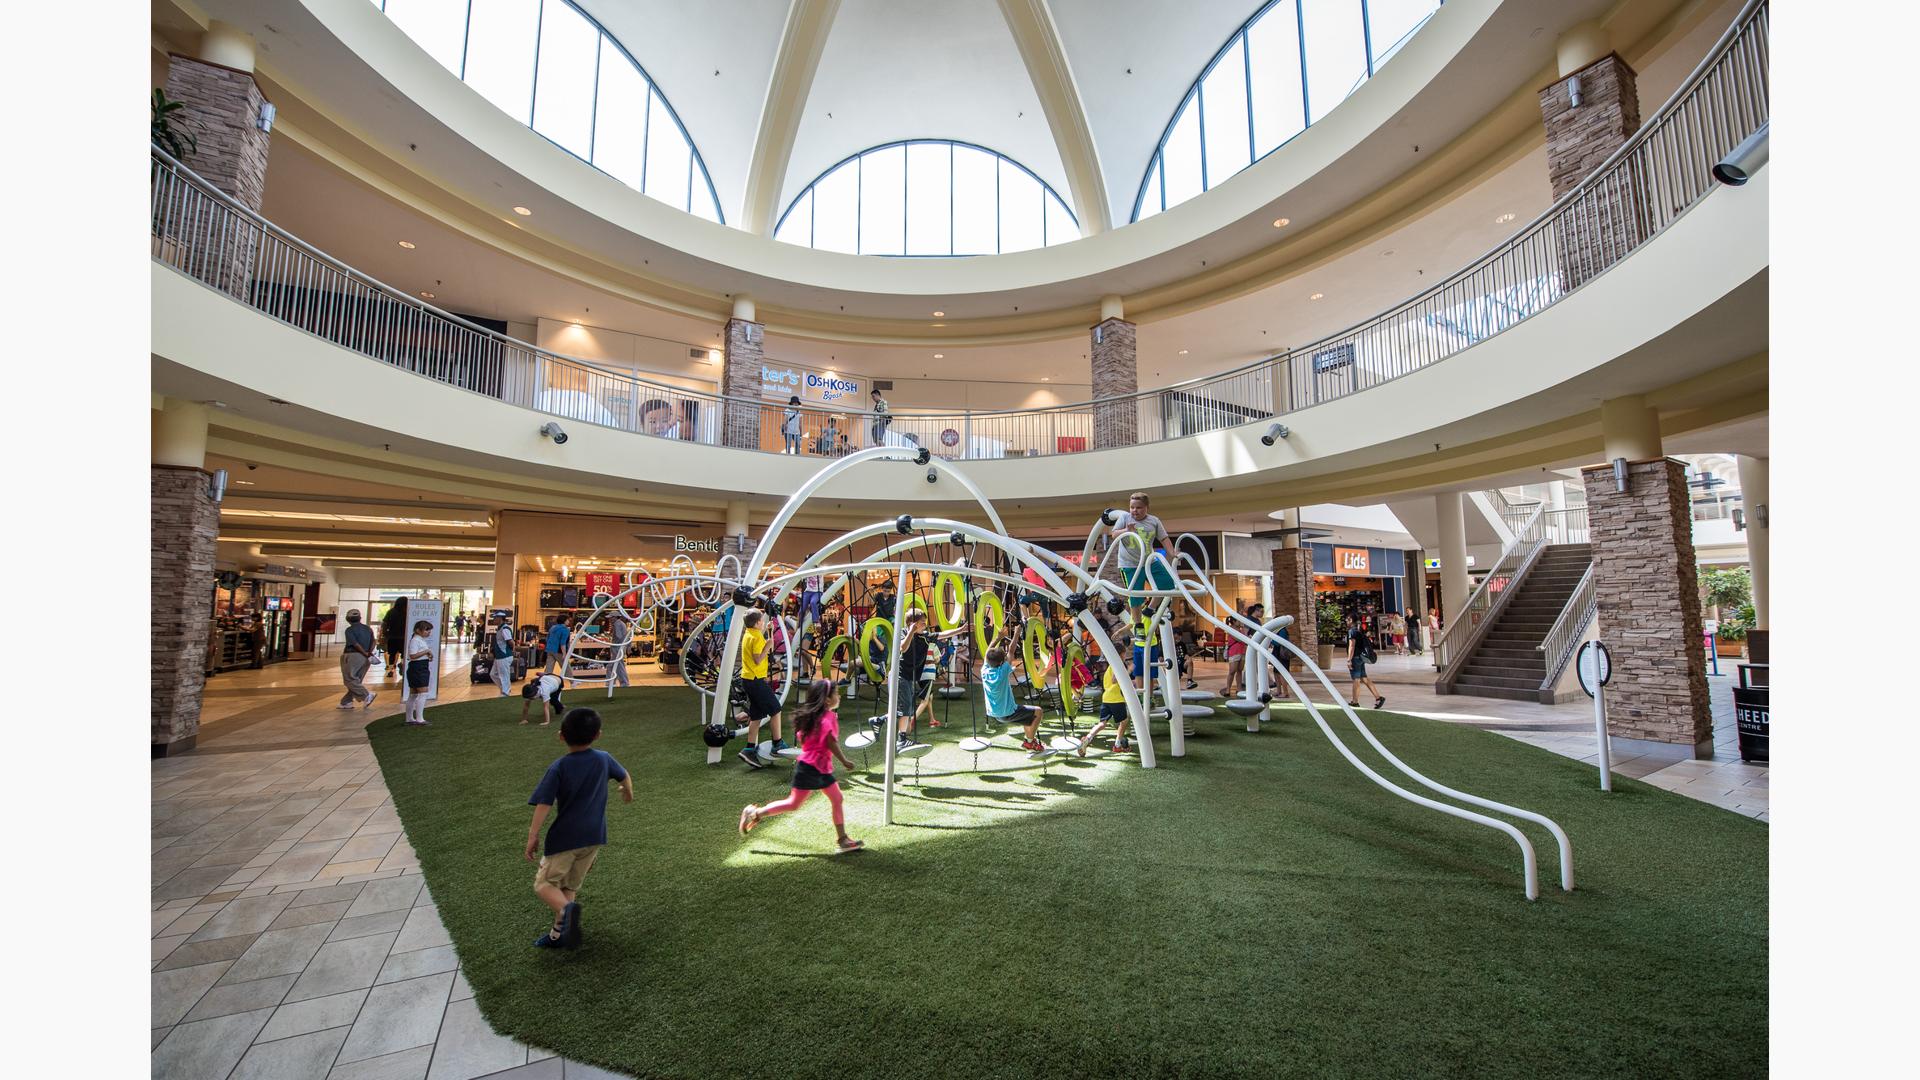 Lougheed Town Centre Burnaby, BC. An Evos® play system for ages 5 to 12 features the O-Zone® rings, Hemisphere Climber®, RingTangle™ climber, SwiggleStix™ bridge